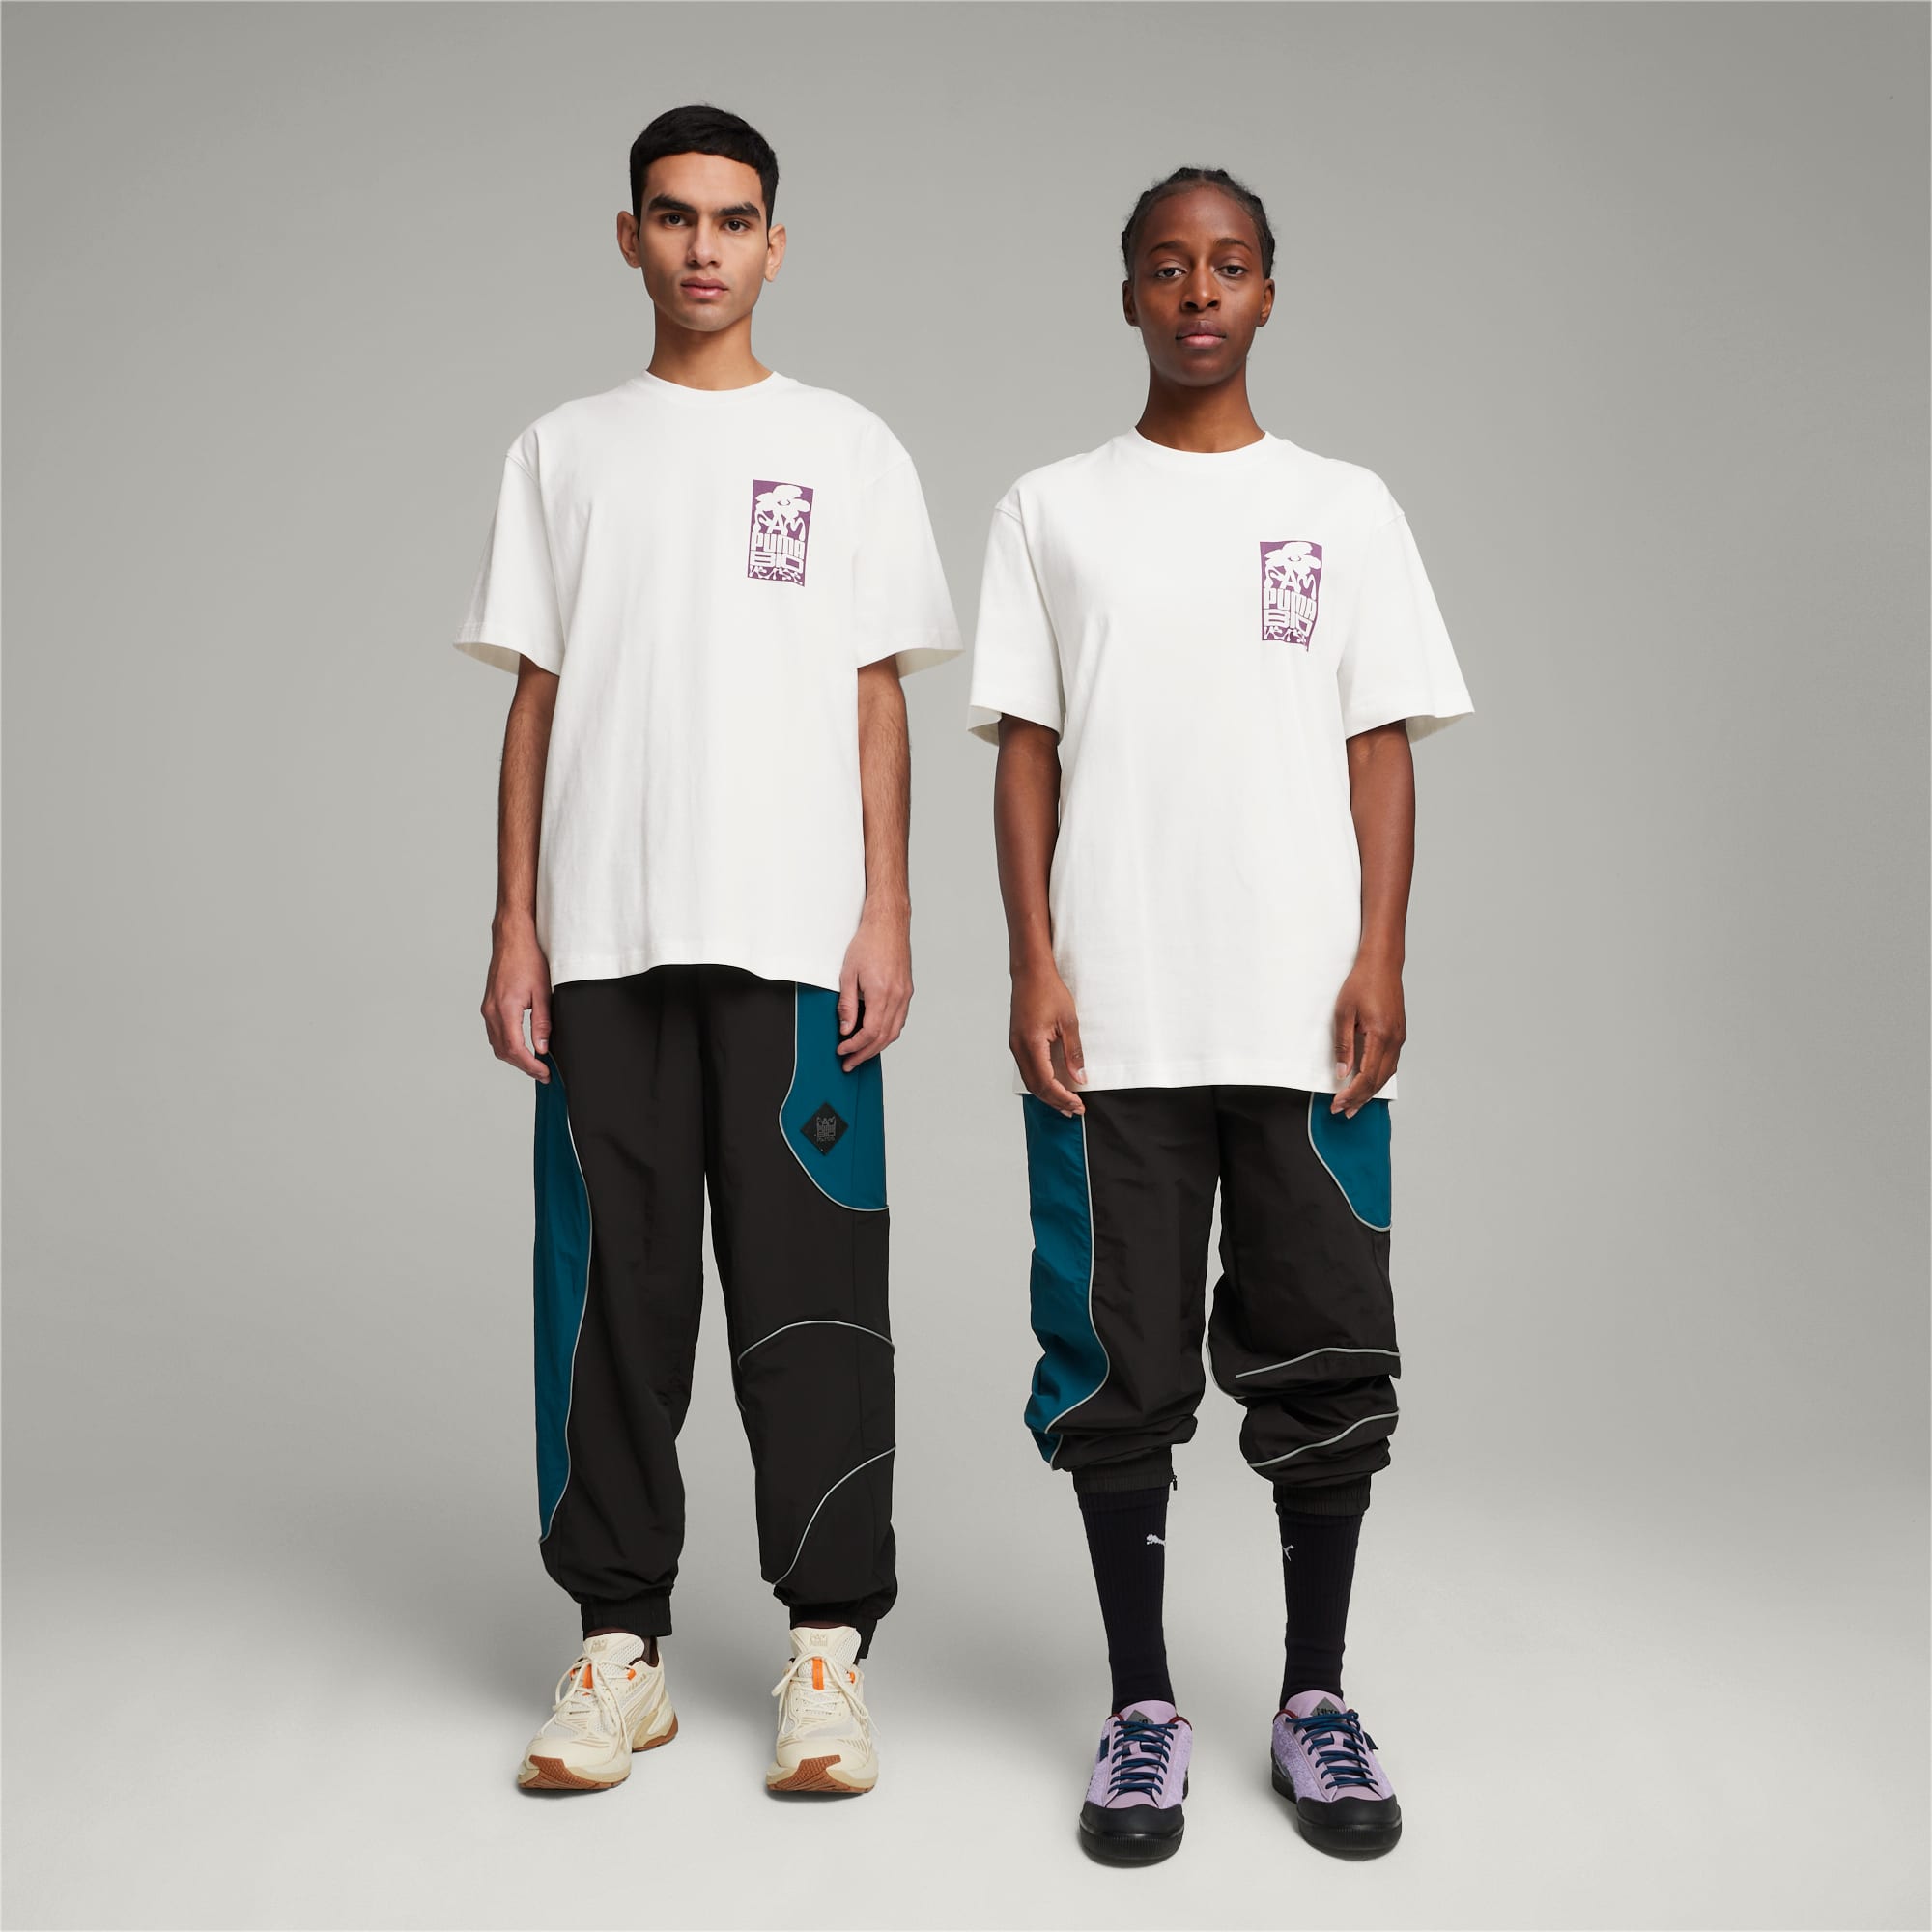 PUMA X PERKS AND MINI T-shirt Voor Dames, Wit